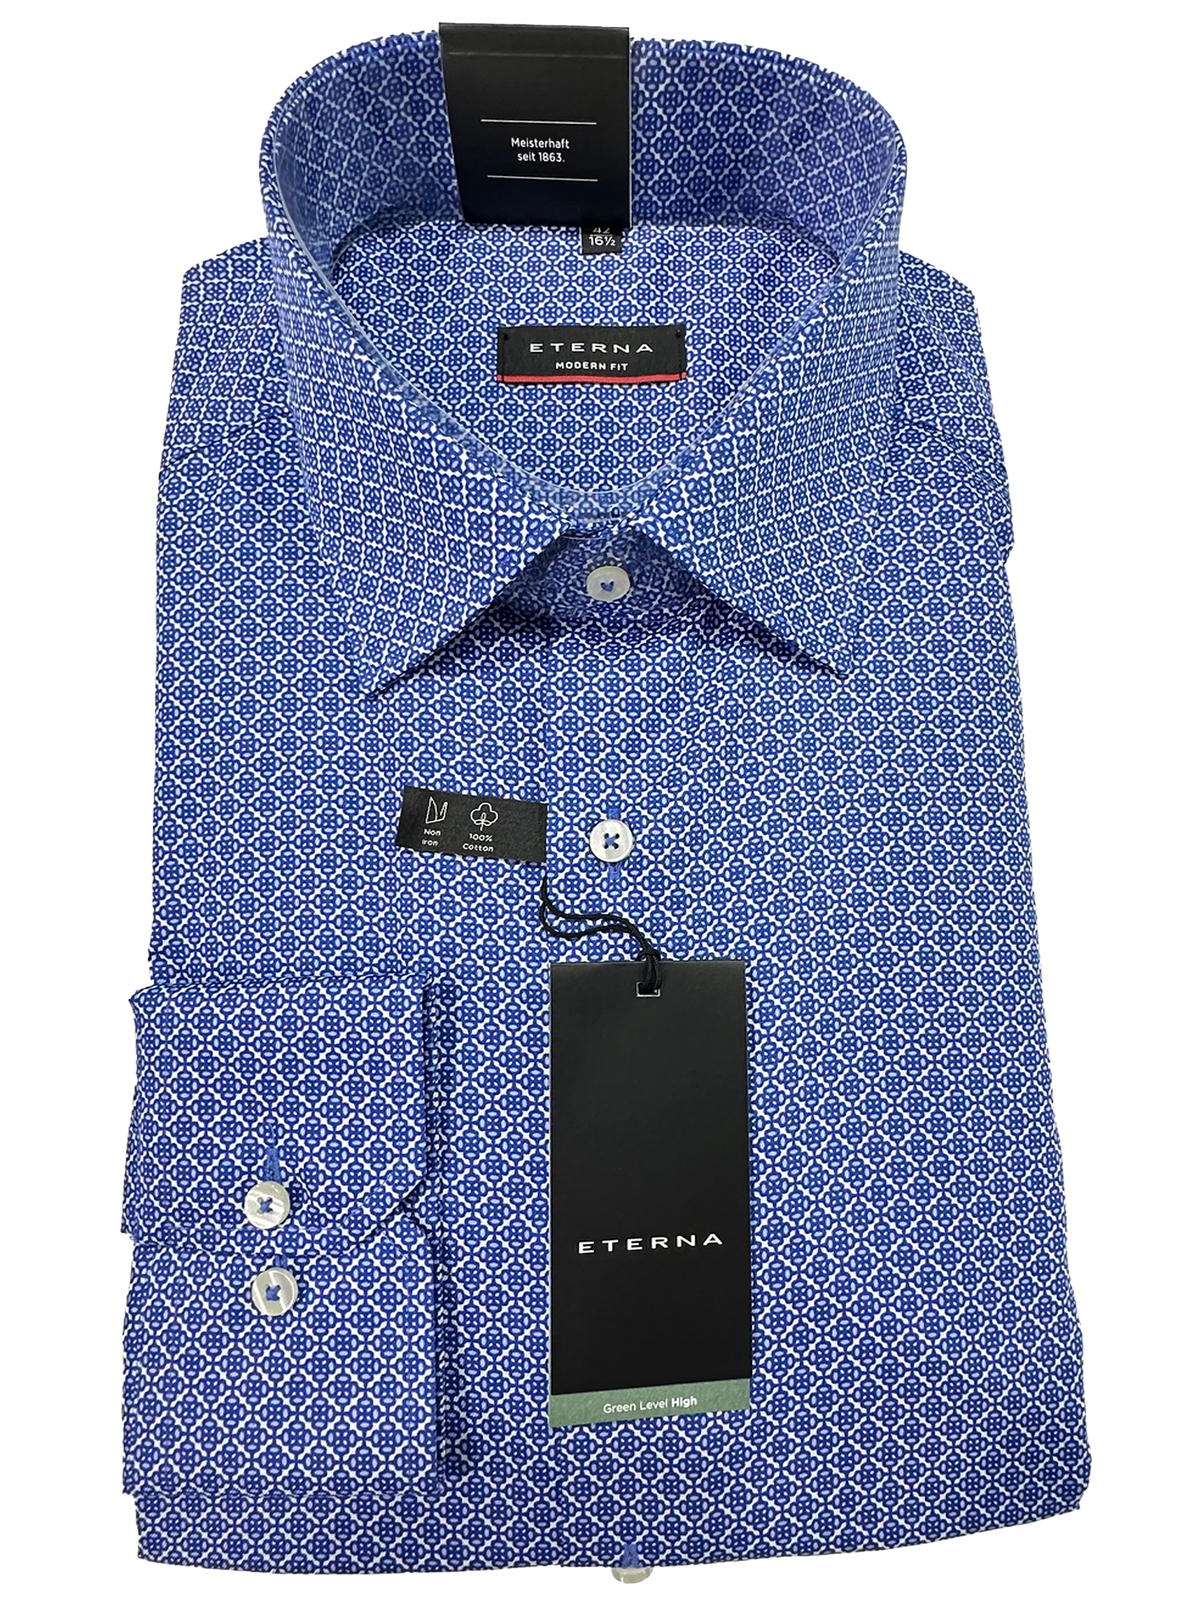 Eterna Shirts 2 Collection – Menswear Harrys – for Page